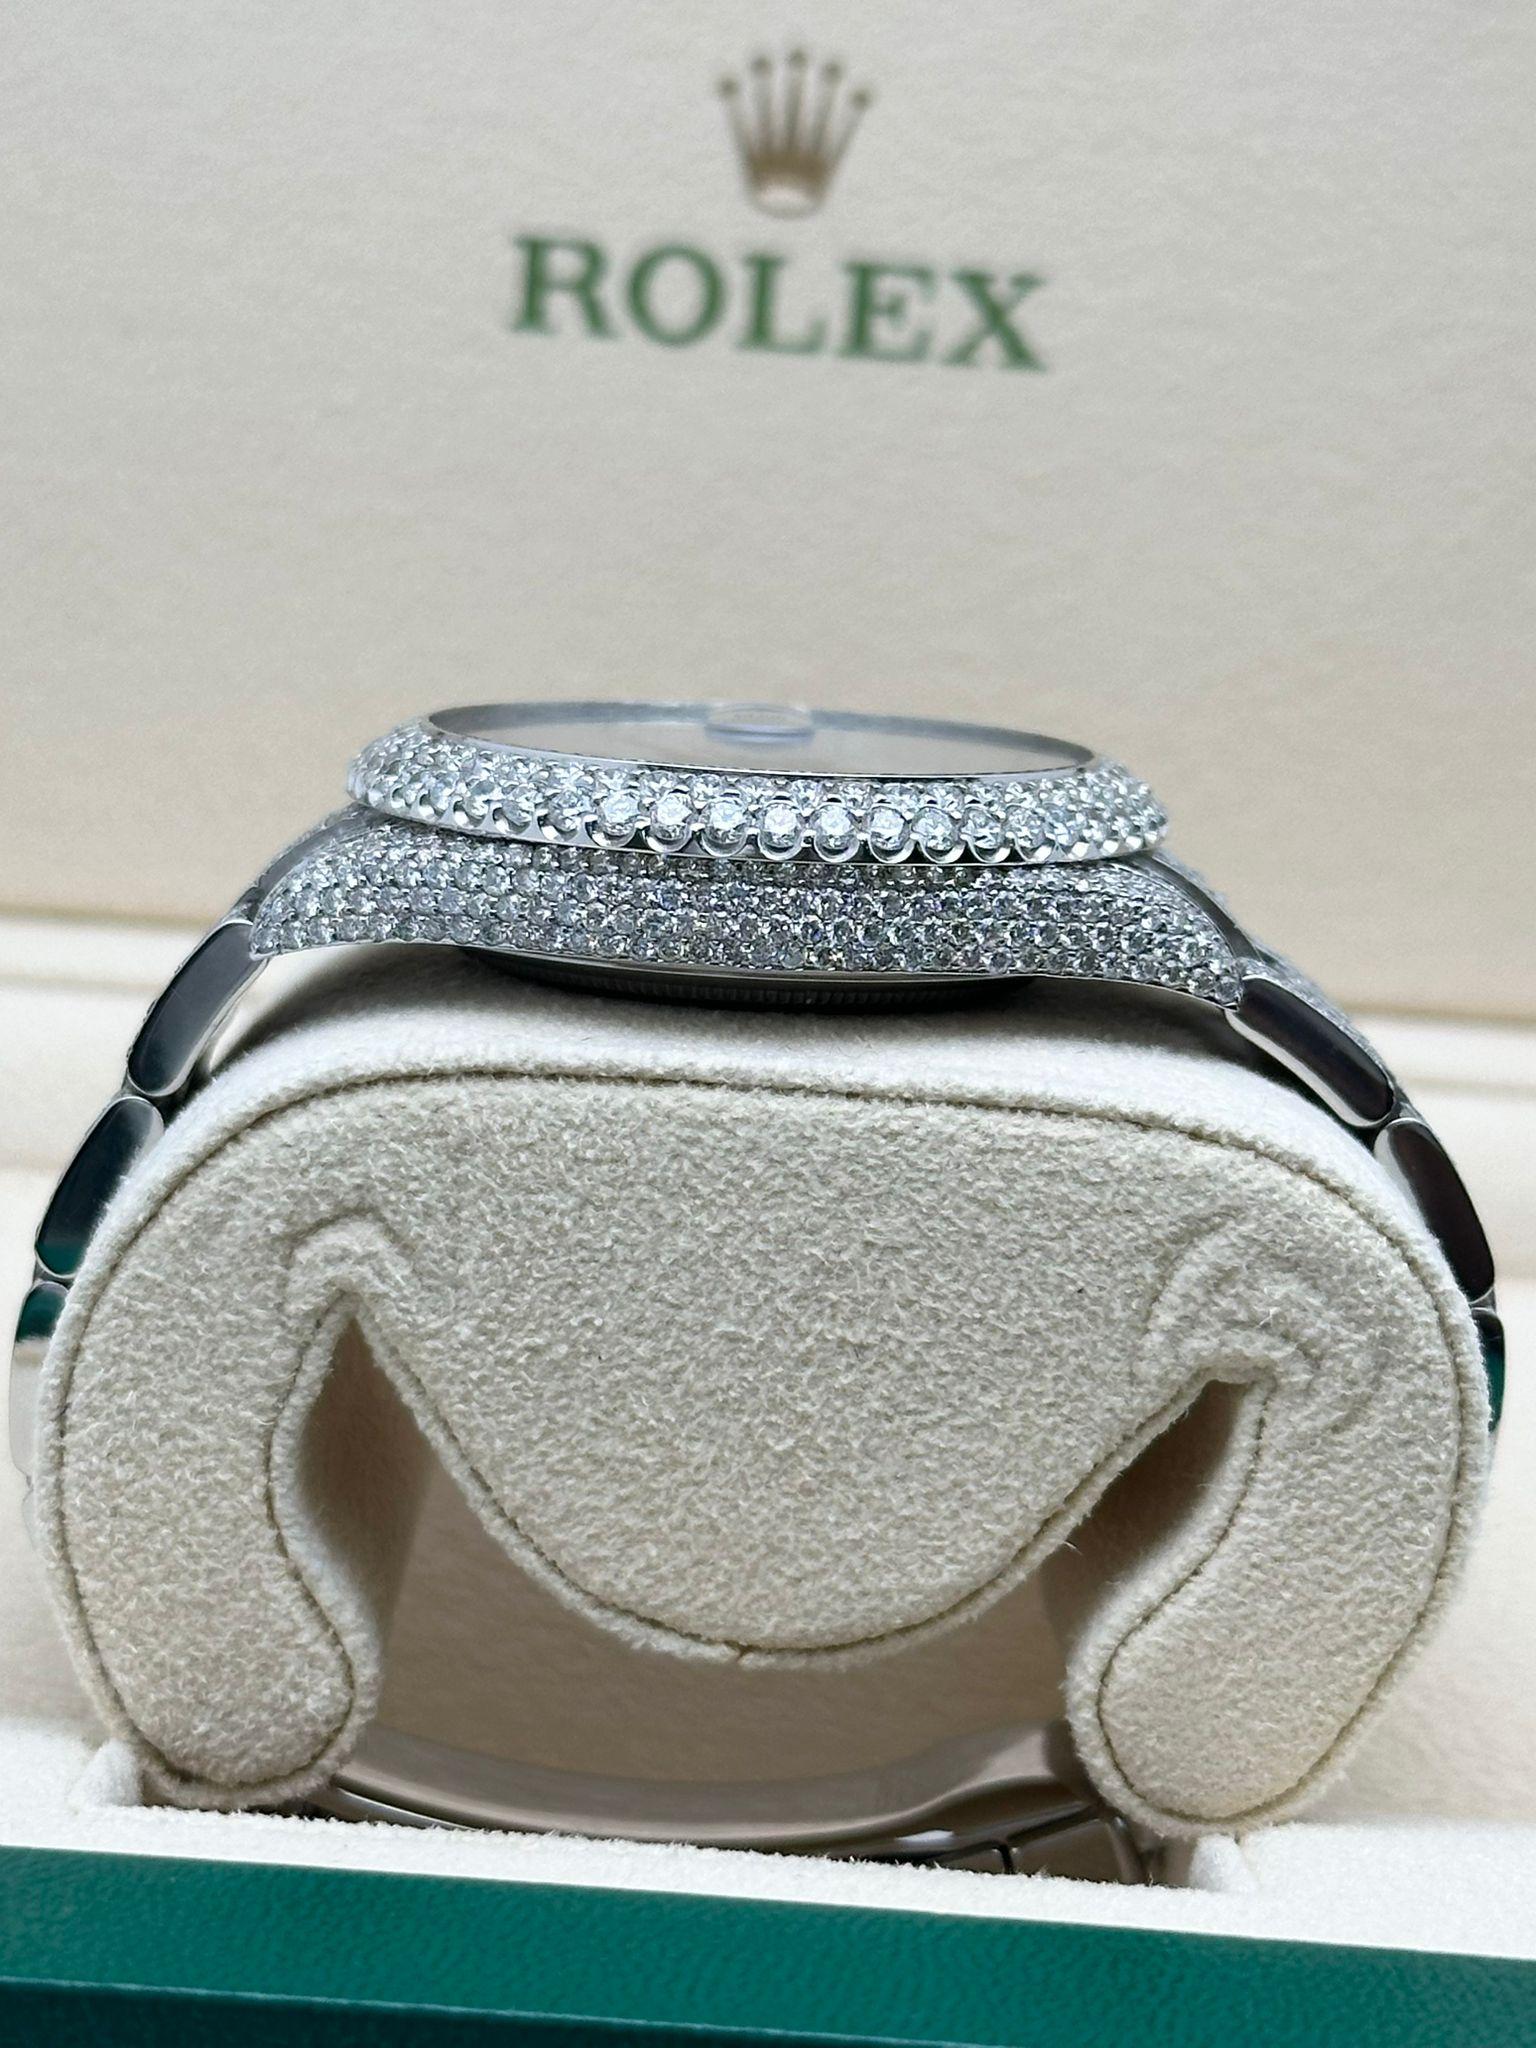 Rolex Datejust 41 Steel Custom Fully Iced Out Blue Dial Watch 126300 For Sale 1